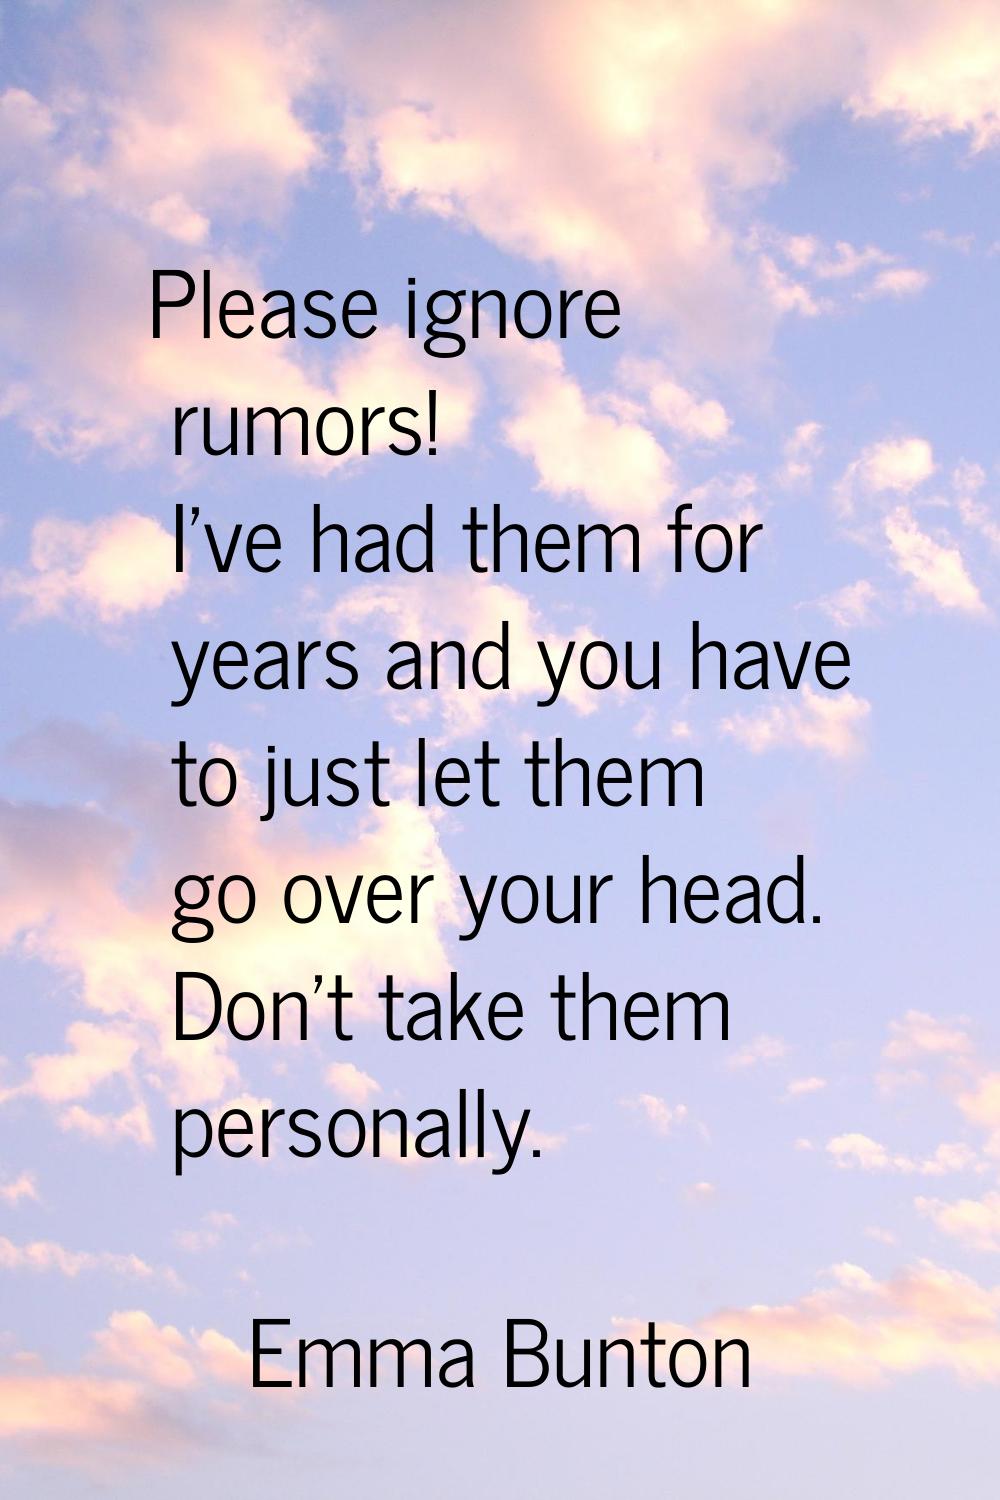 Please ignore rumors! I've had them for years and you have to just let them go over your head. Don'